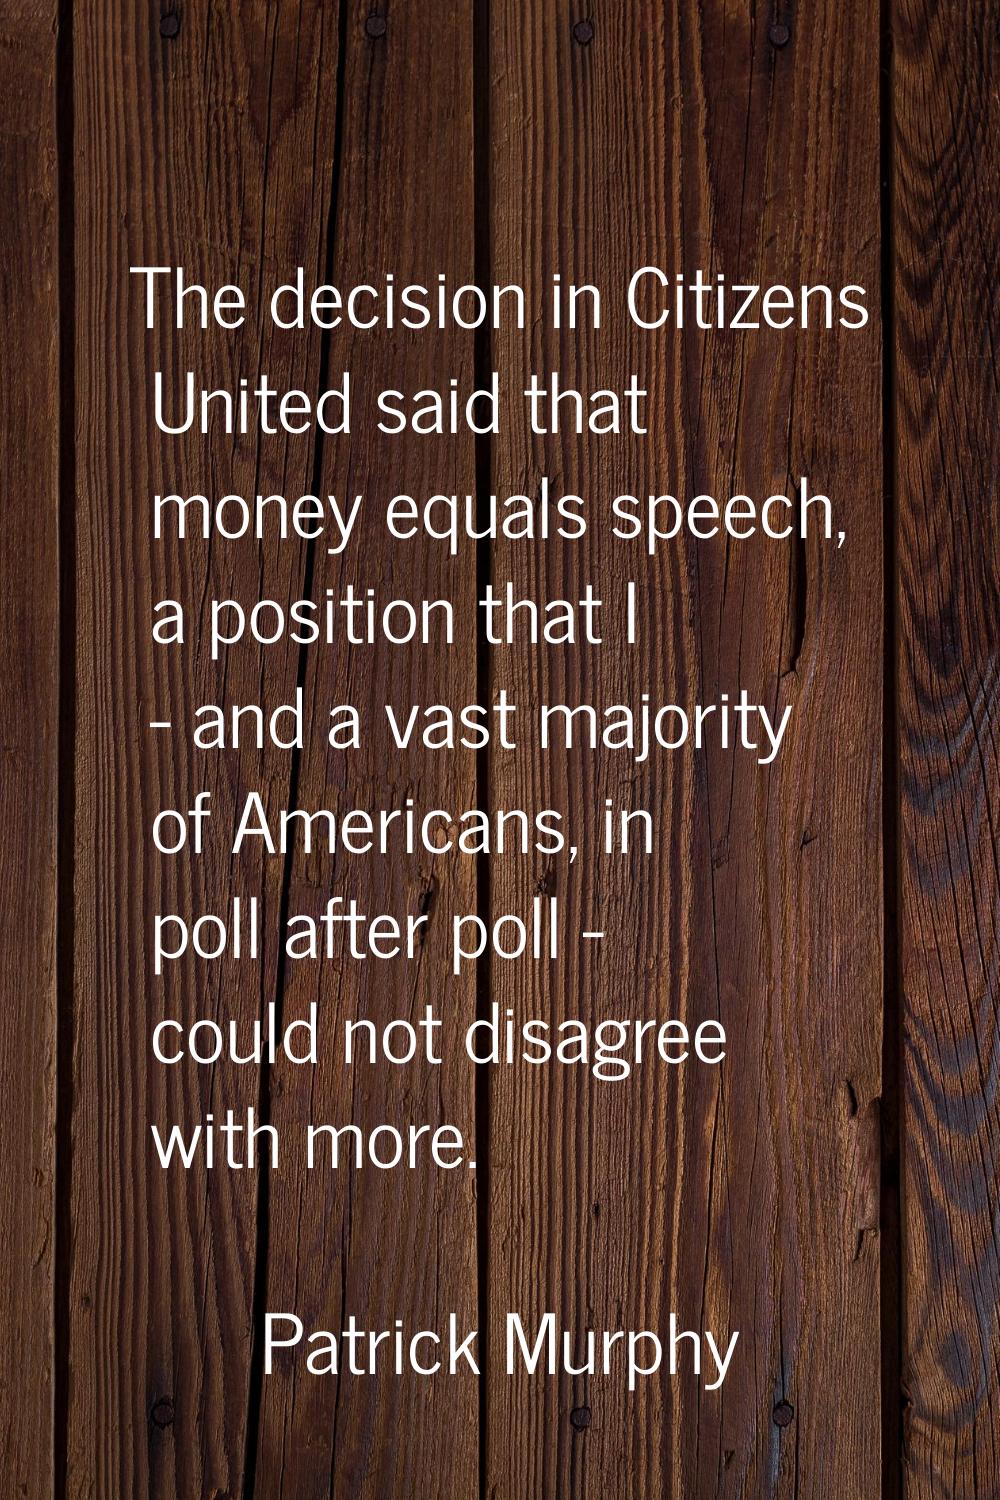 The decision in Citizens United said that money equals speech, a position that I - and a vast major